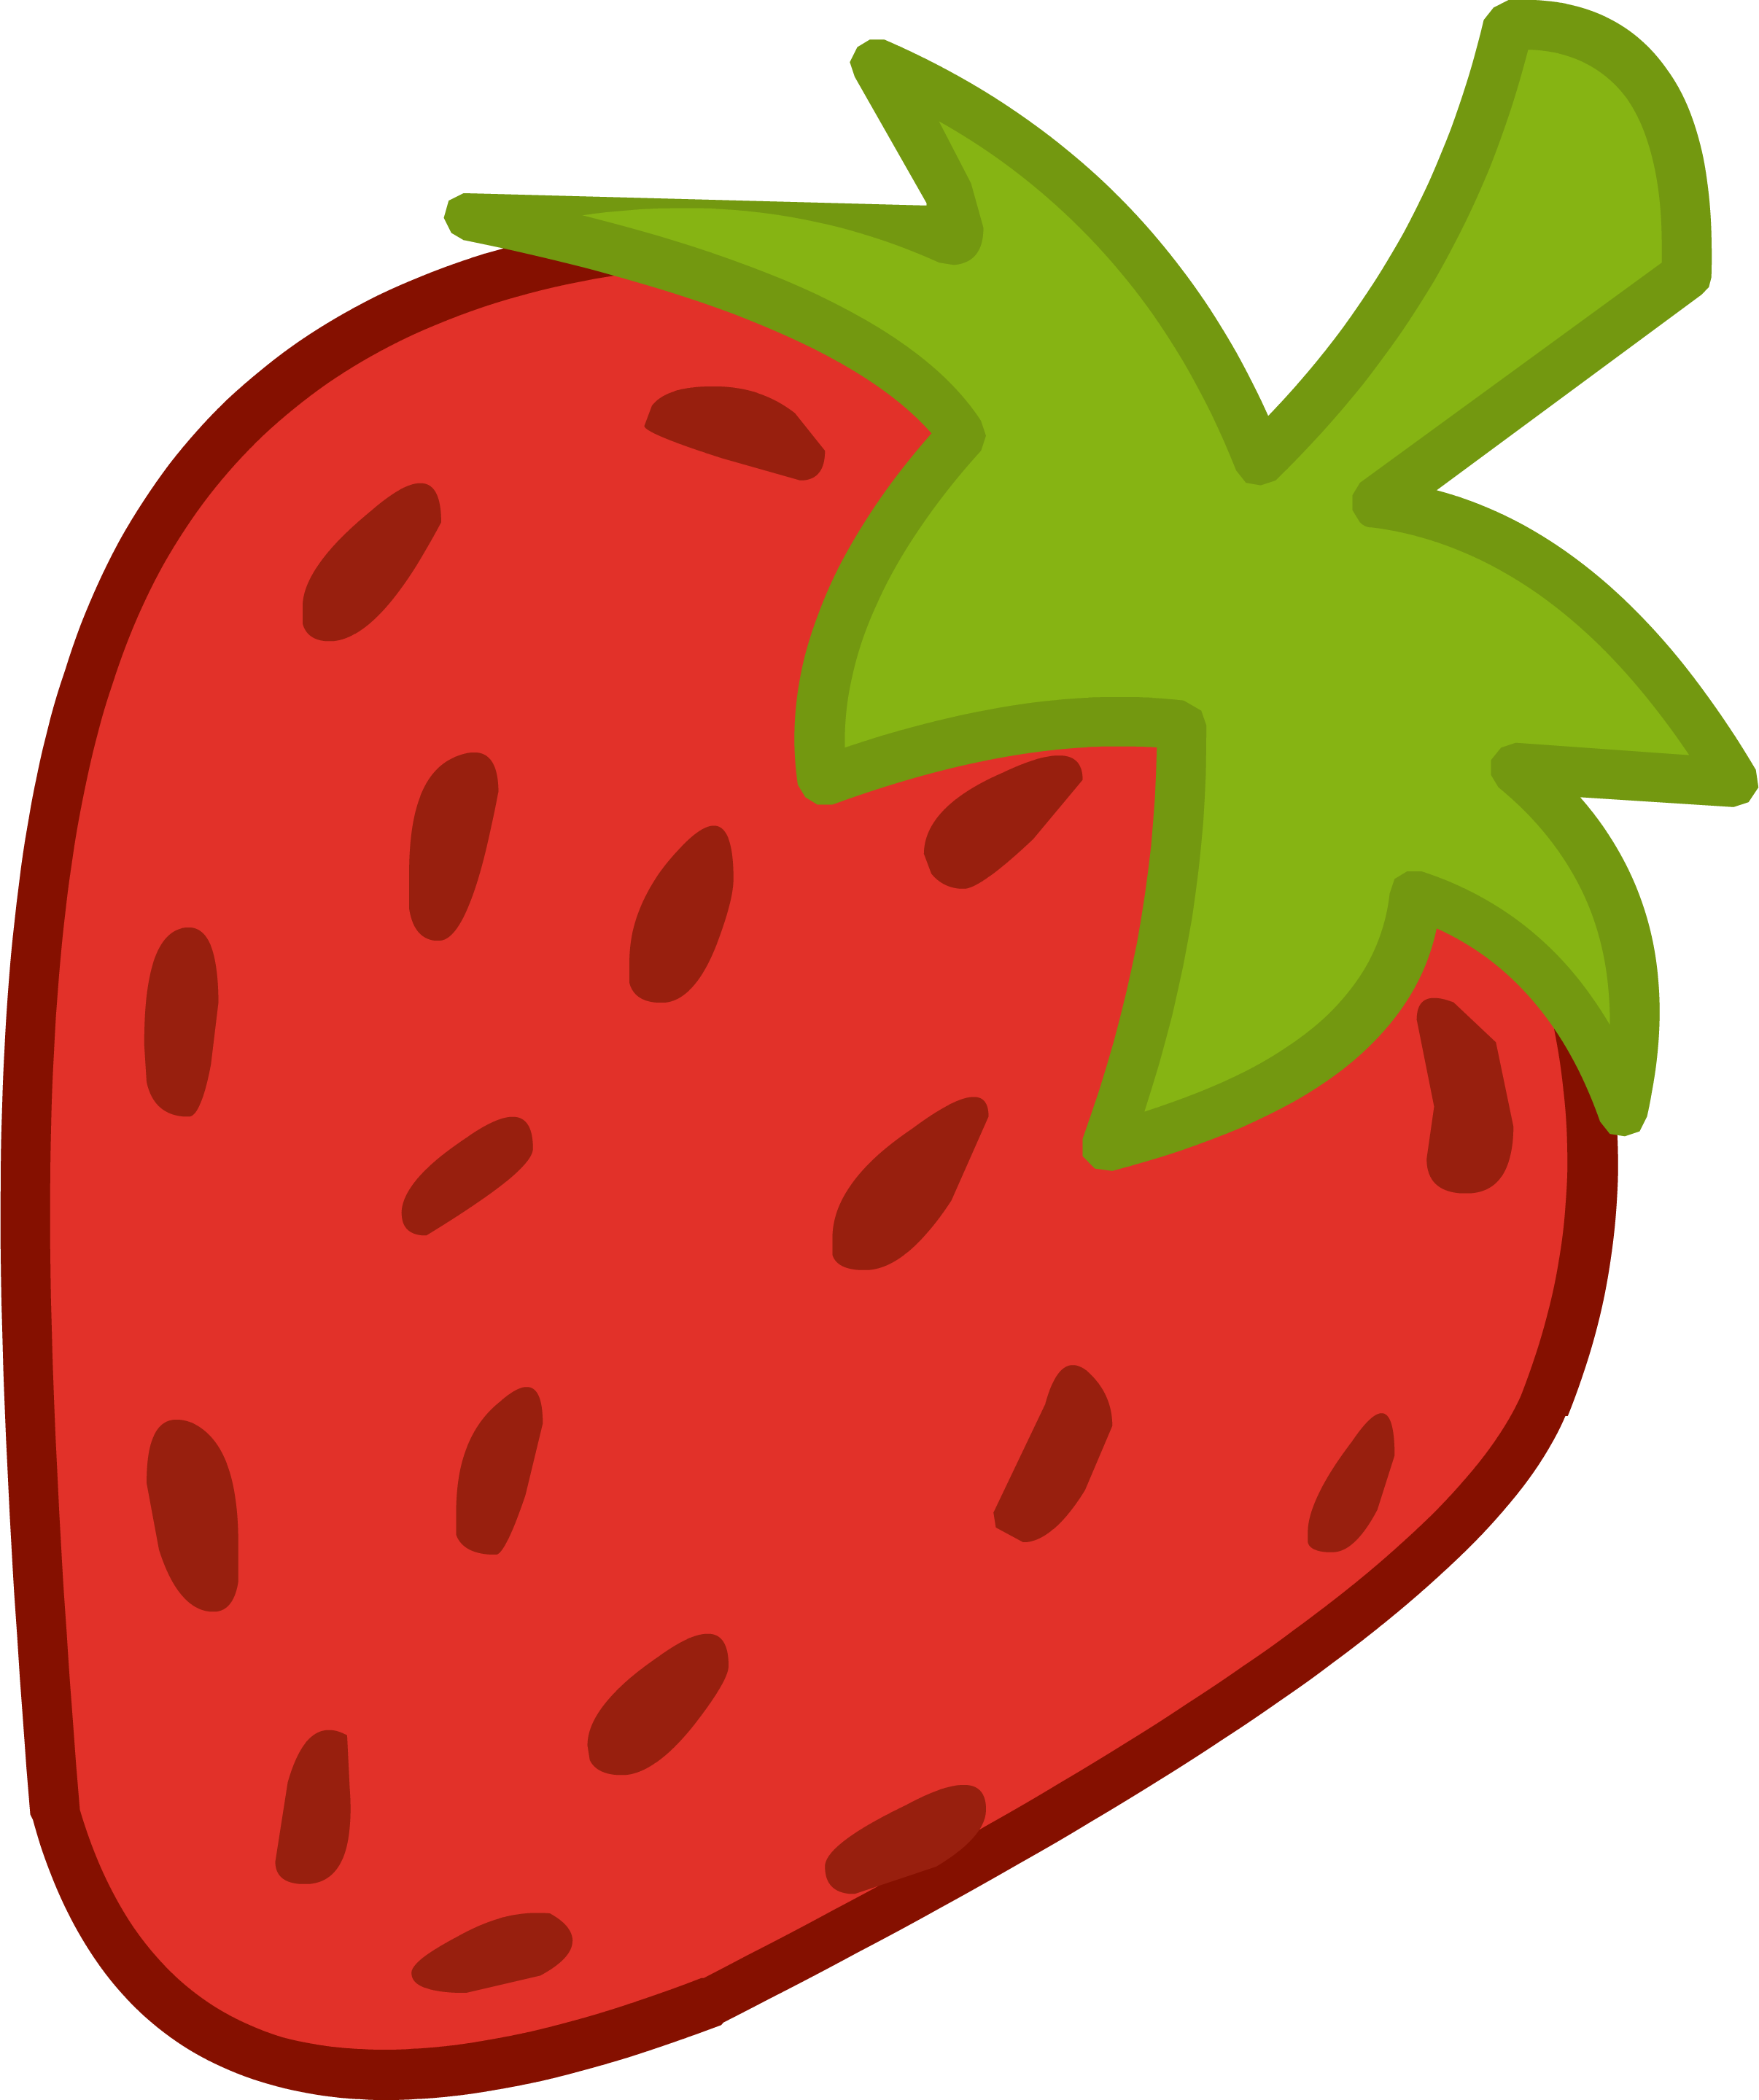 Strawberry drawing images.